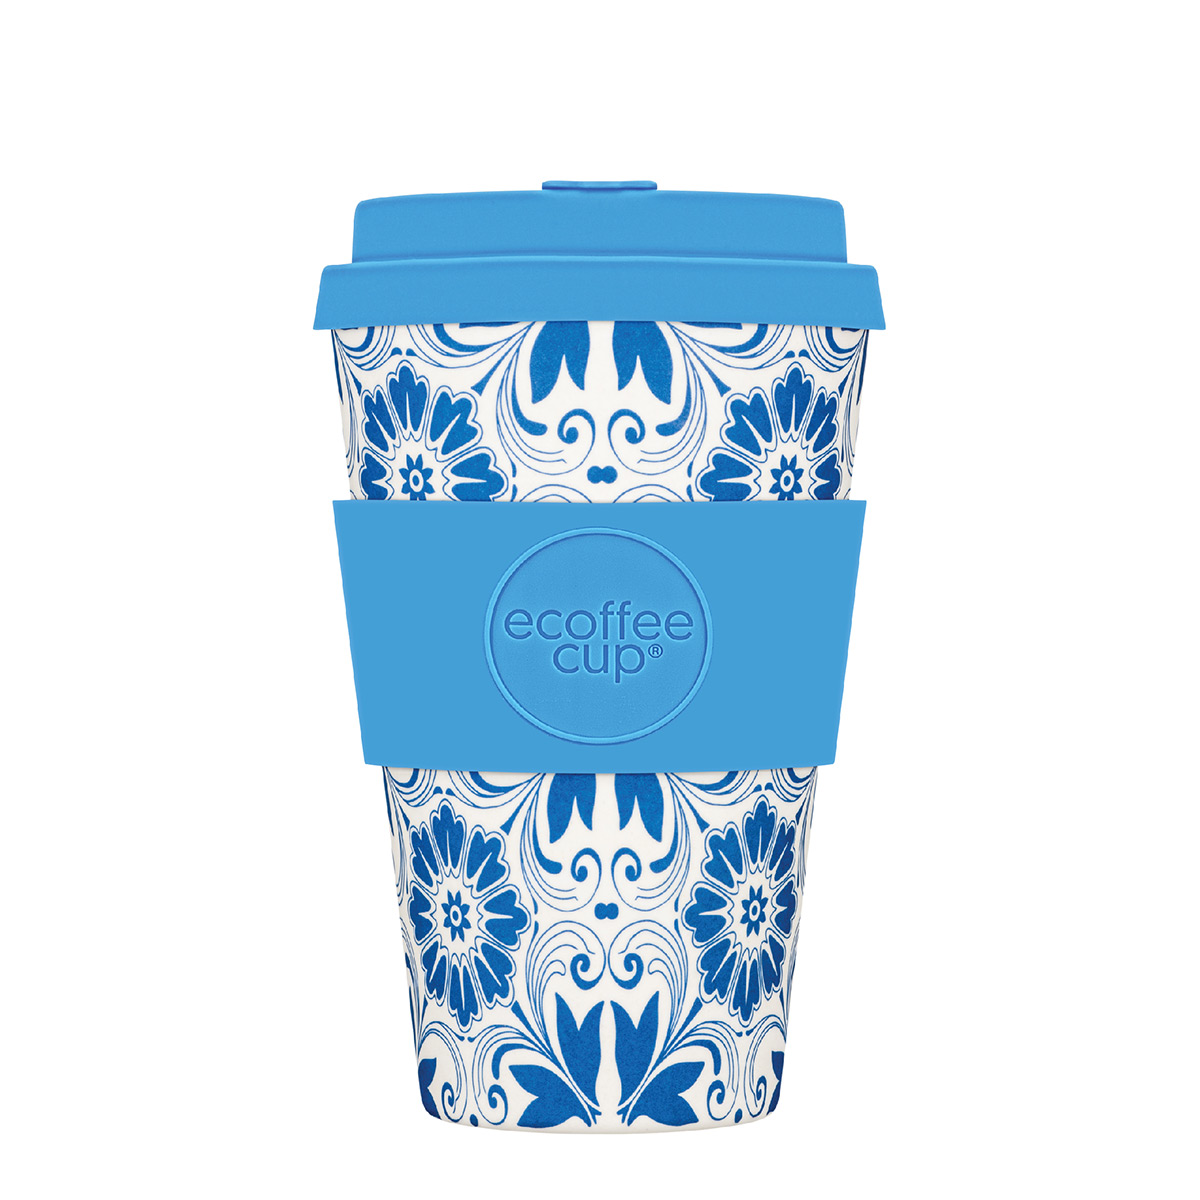 Delft Touch 400ml - Ecoffee Cup